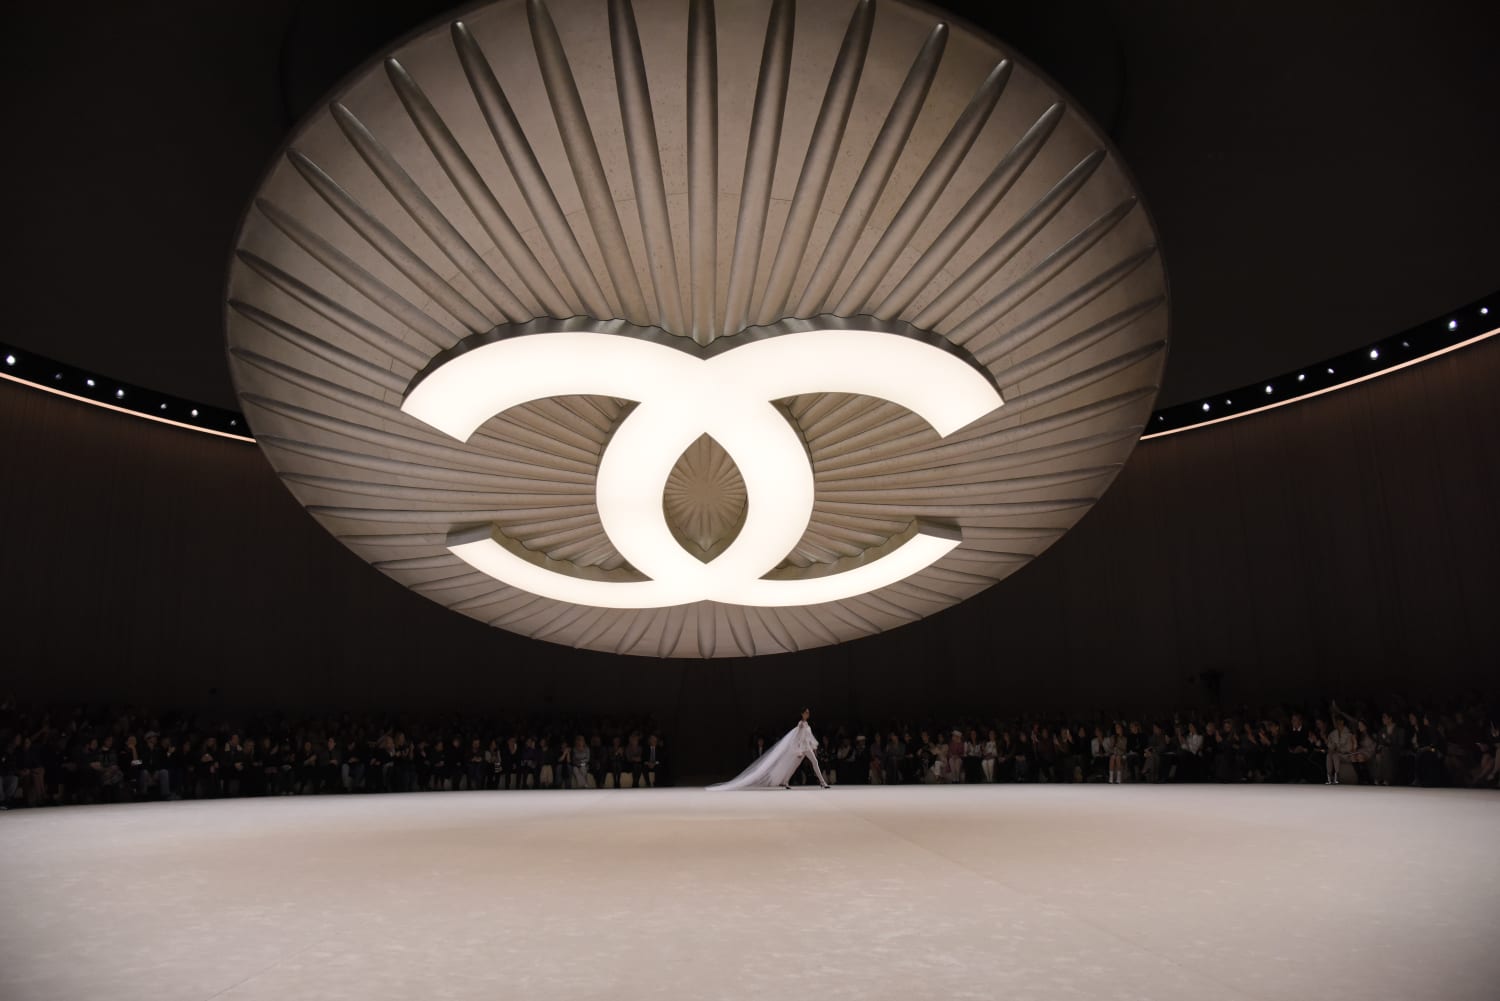 Chanel runway show. Large Chanel logo emblazoned on the ceiling with a model walking in a white gown.